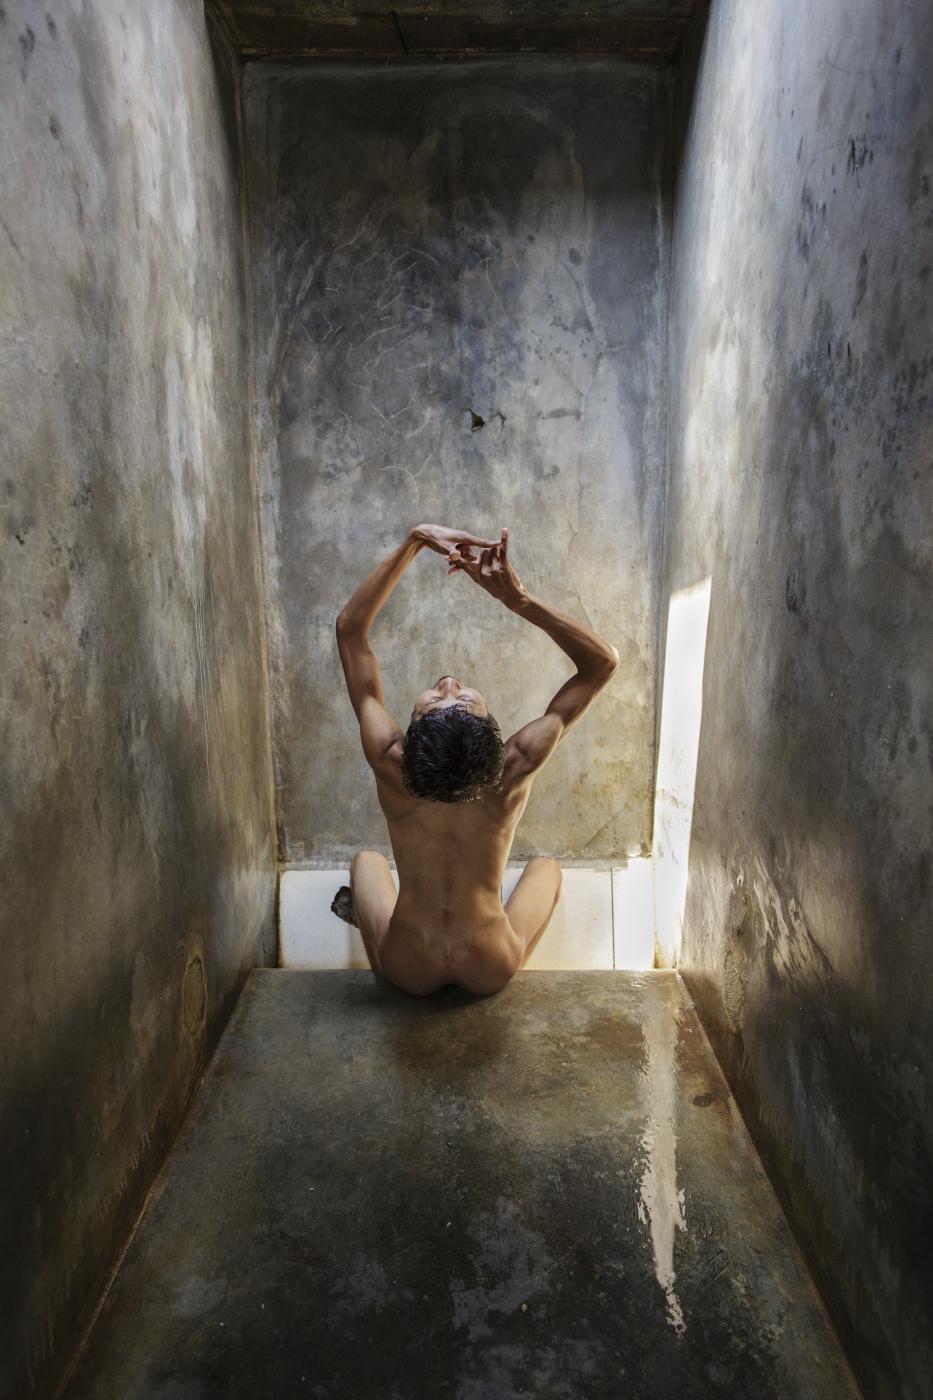 Disorder - 2012_A man sings in his cell, his hands moving in an...